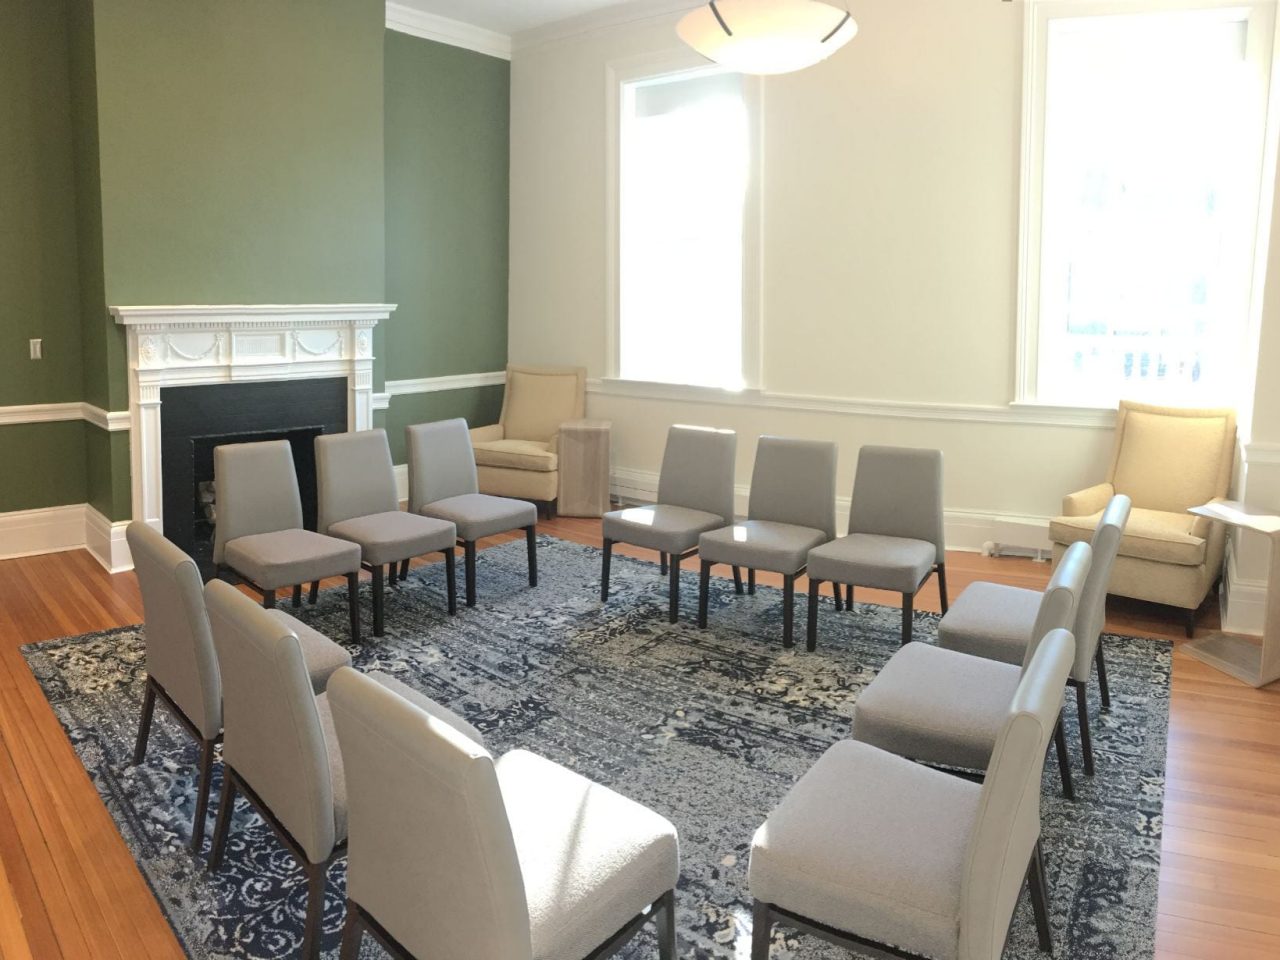 Small group discussion space with fireplace and chairs arranged in a circle